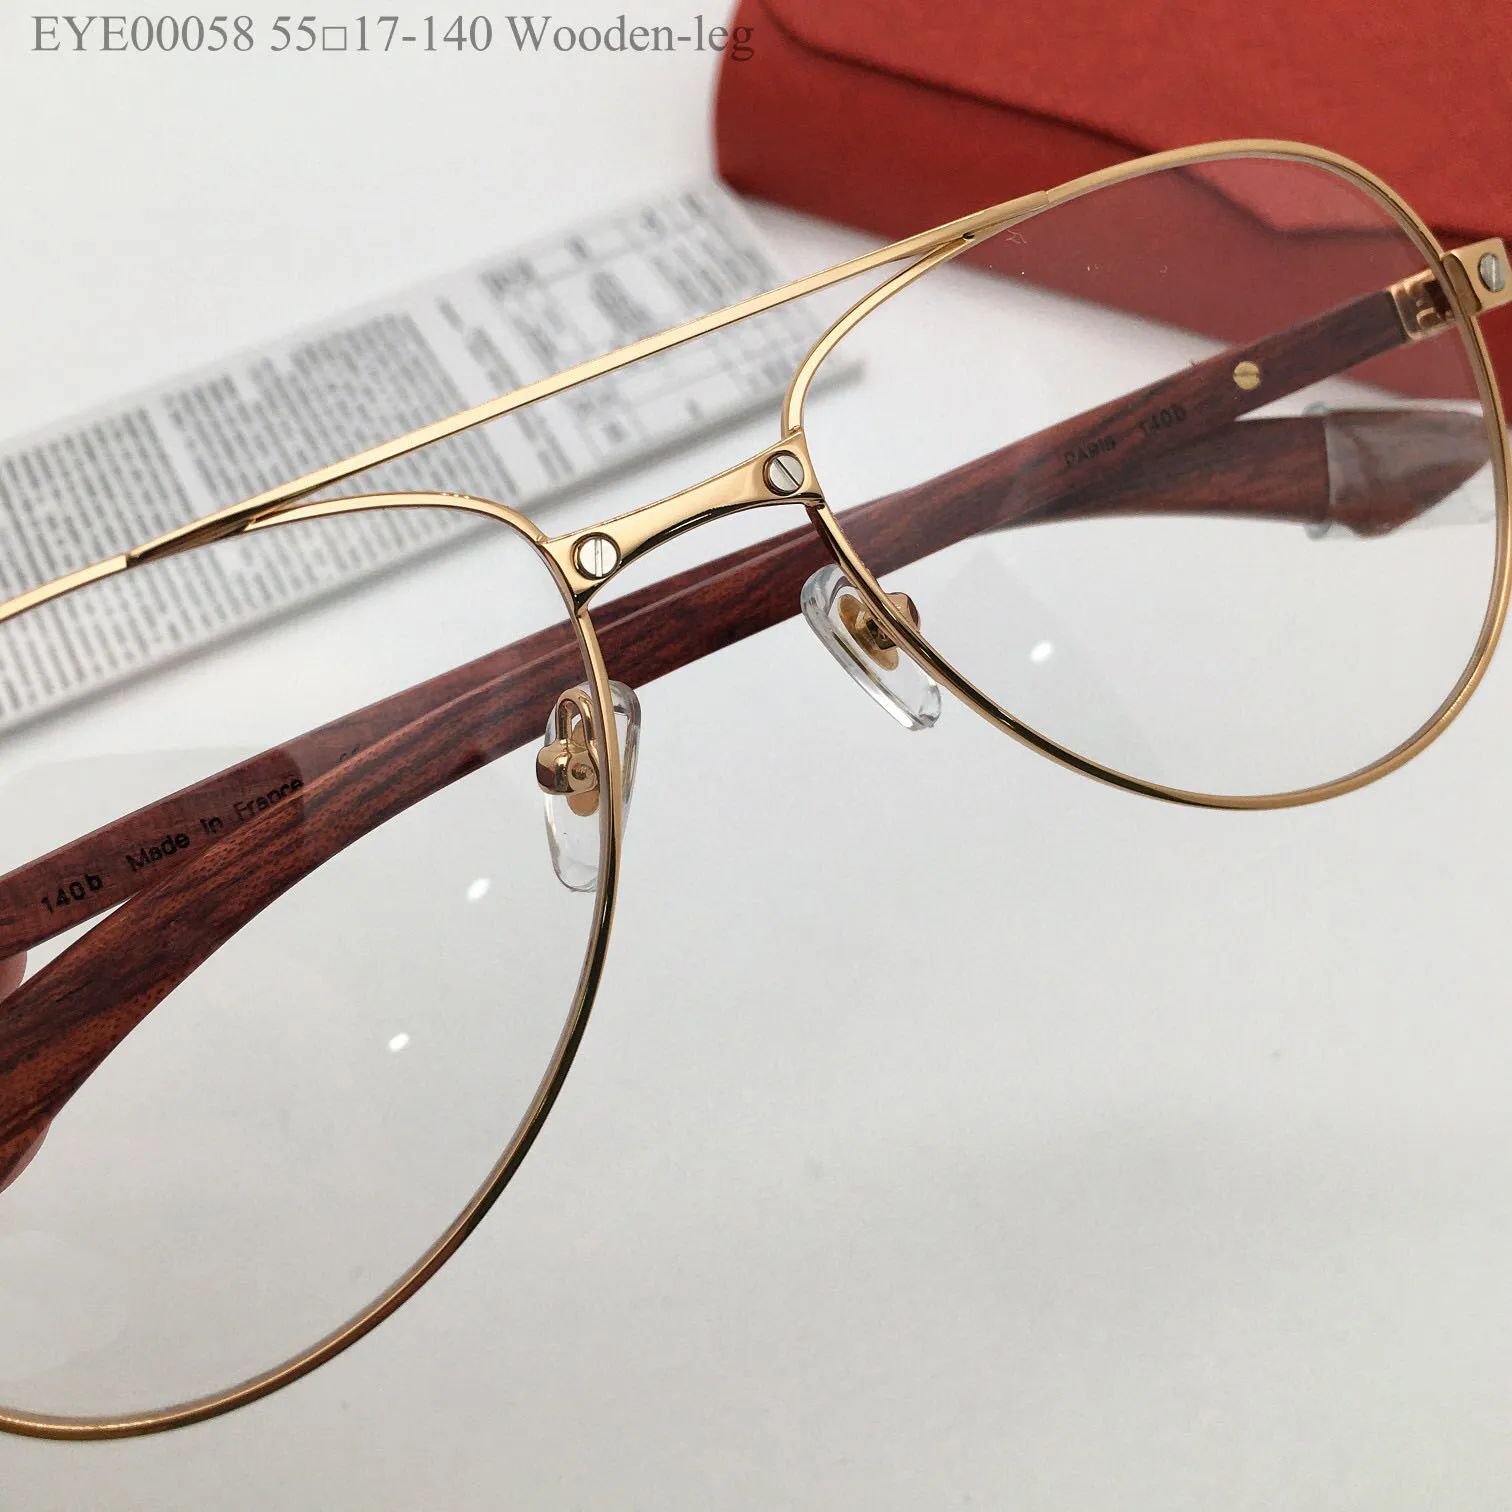 New fashion design pilot shape optical glasses 00058 metal frame wooden temples men and women simple and popular style light and easy to wear eyewear